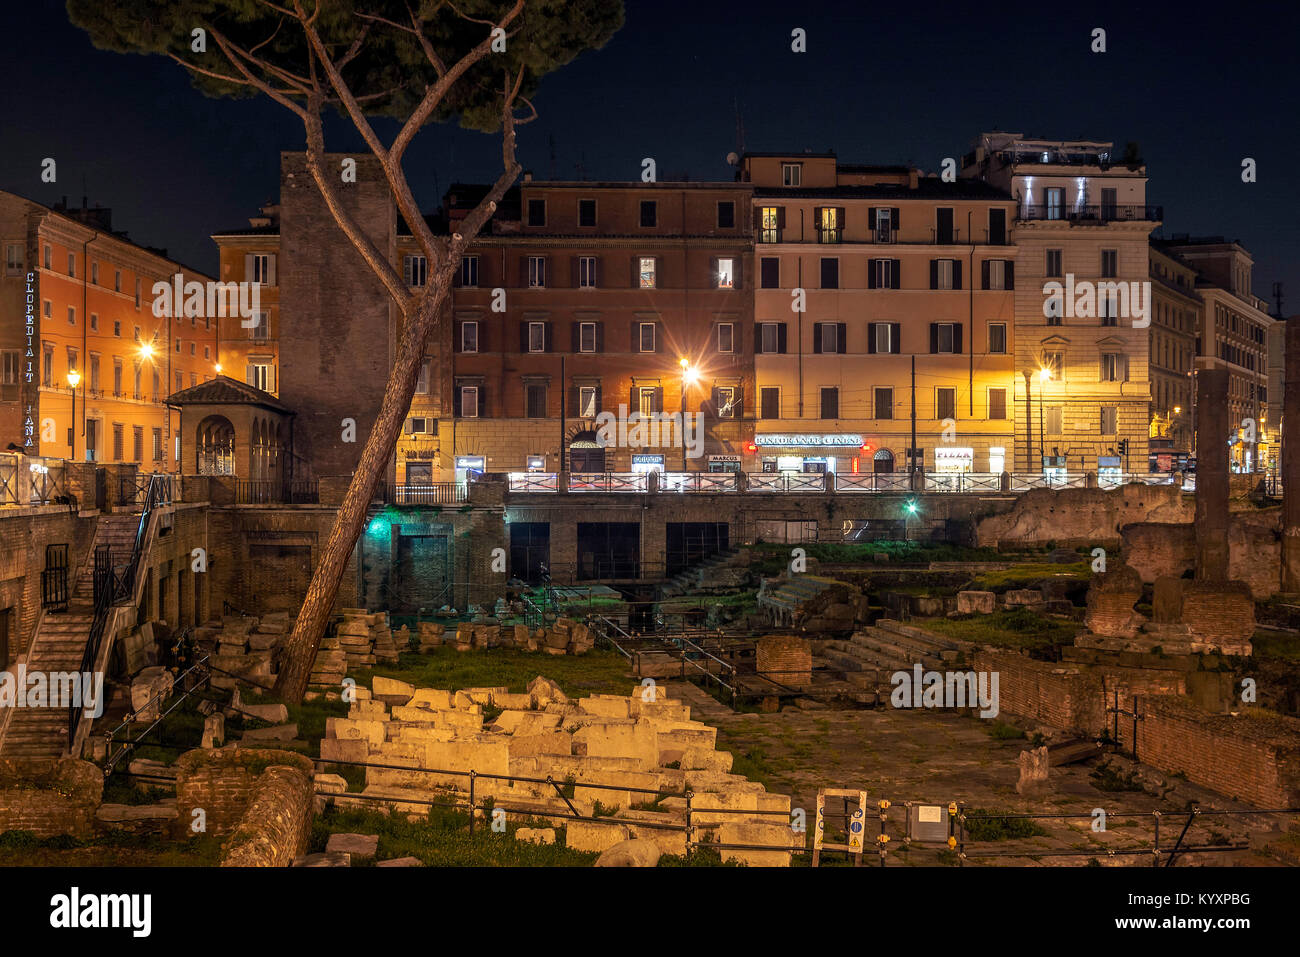 Rome, Italy, february 15, 2017: night view of the ancient roman ruins in Largo di Torre Argentina in Rome Stock Photo